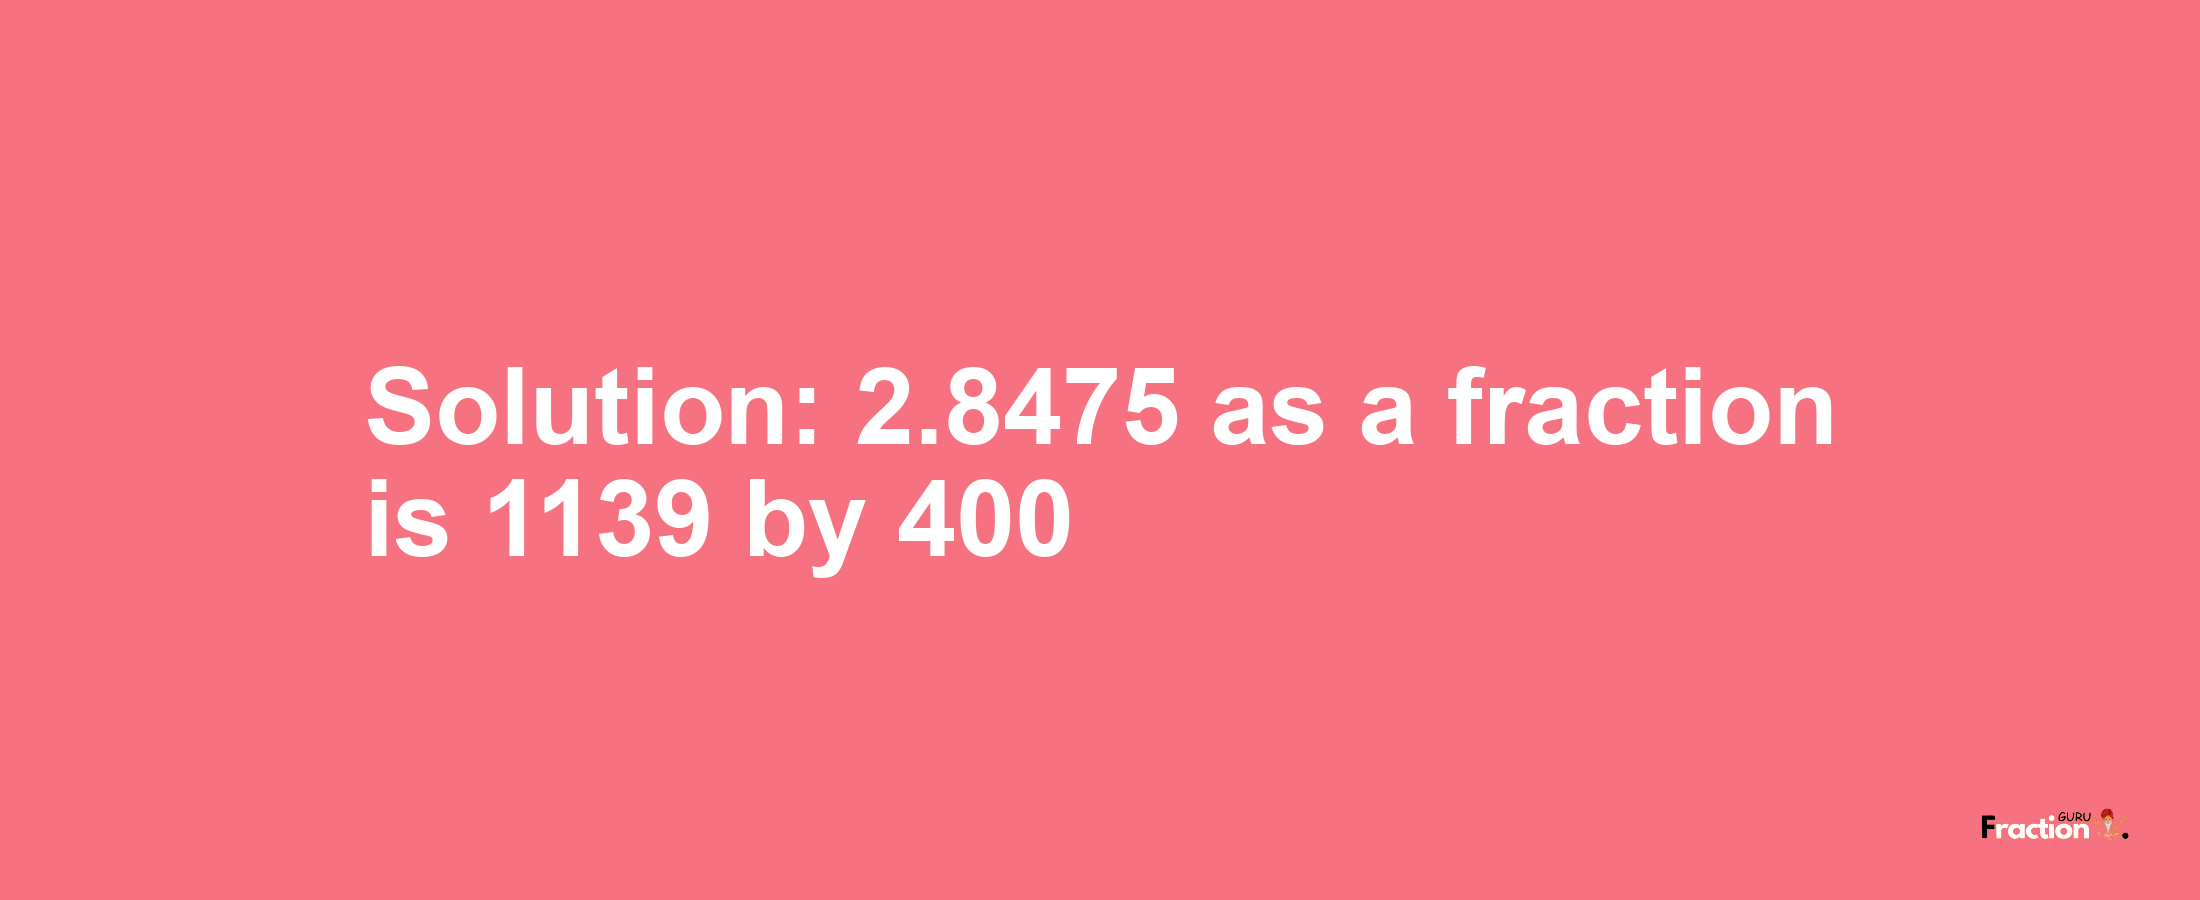 Solution:2.8475 as a fraction is 1139/400